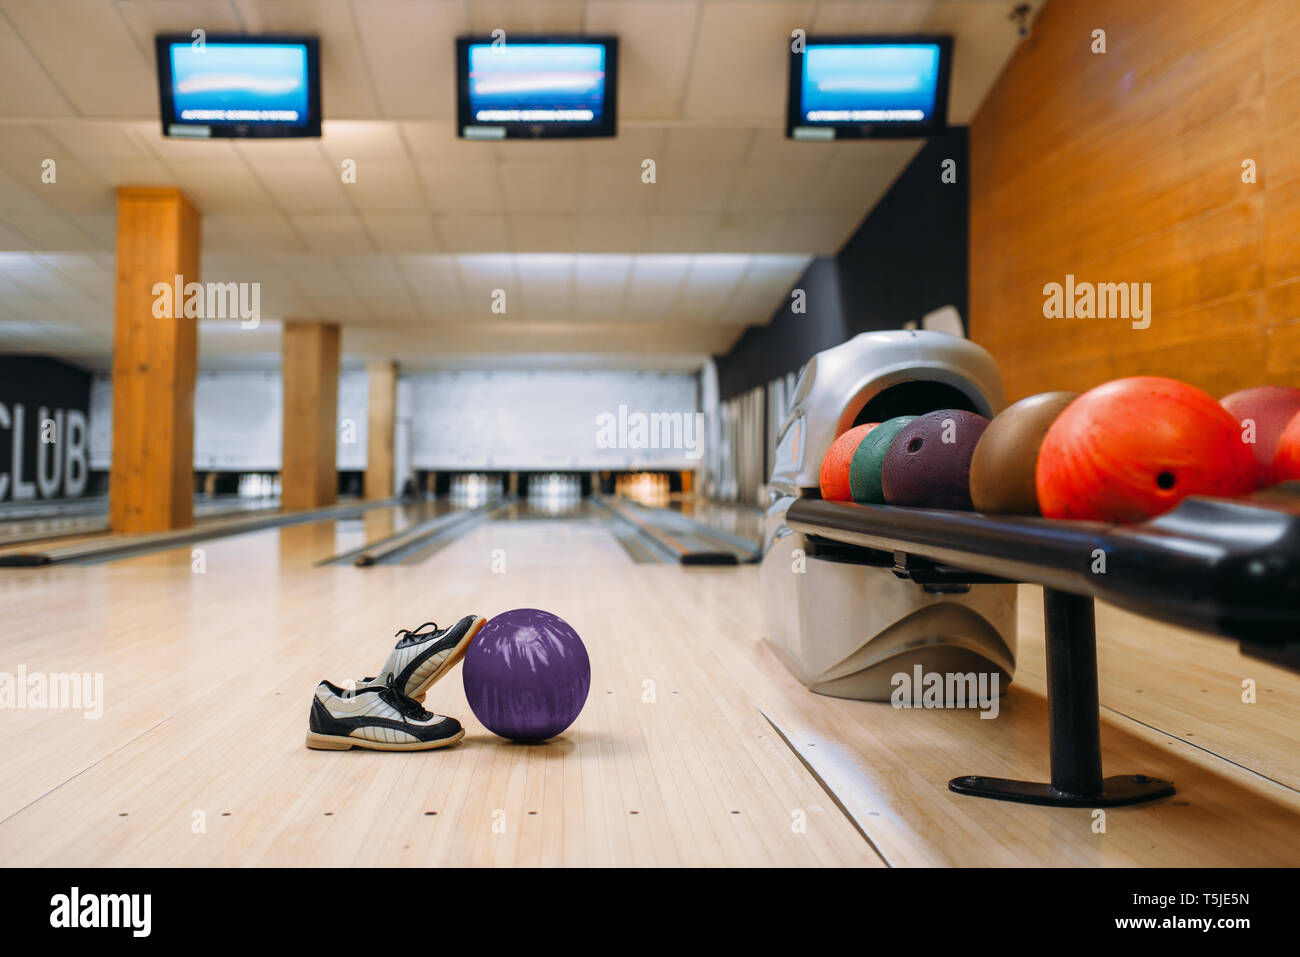 Bowling ball and house shoes on wooden floor in club, pins on background, nobody. Bowl game concept, tenpin Stock Photo